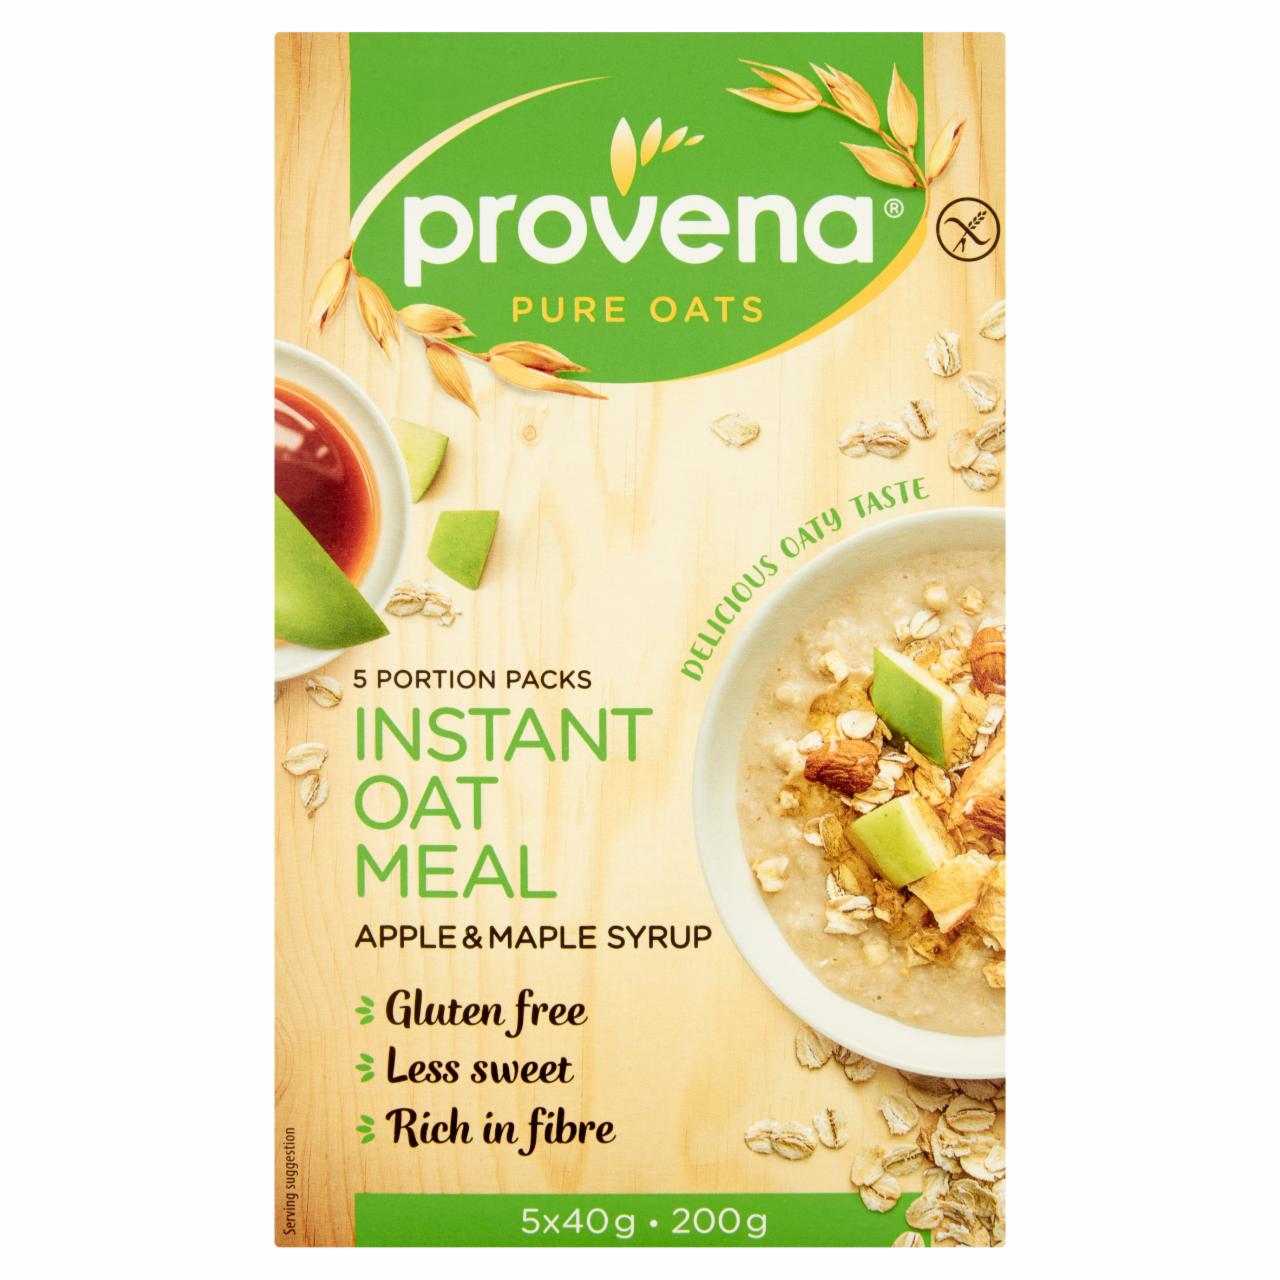 Photo - Provena Gluten Free Instant Oat Meal Apple & Maple Syrup 200 g (5 Pieces)